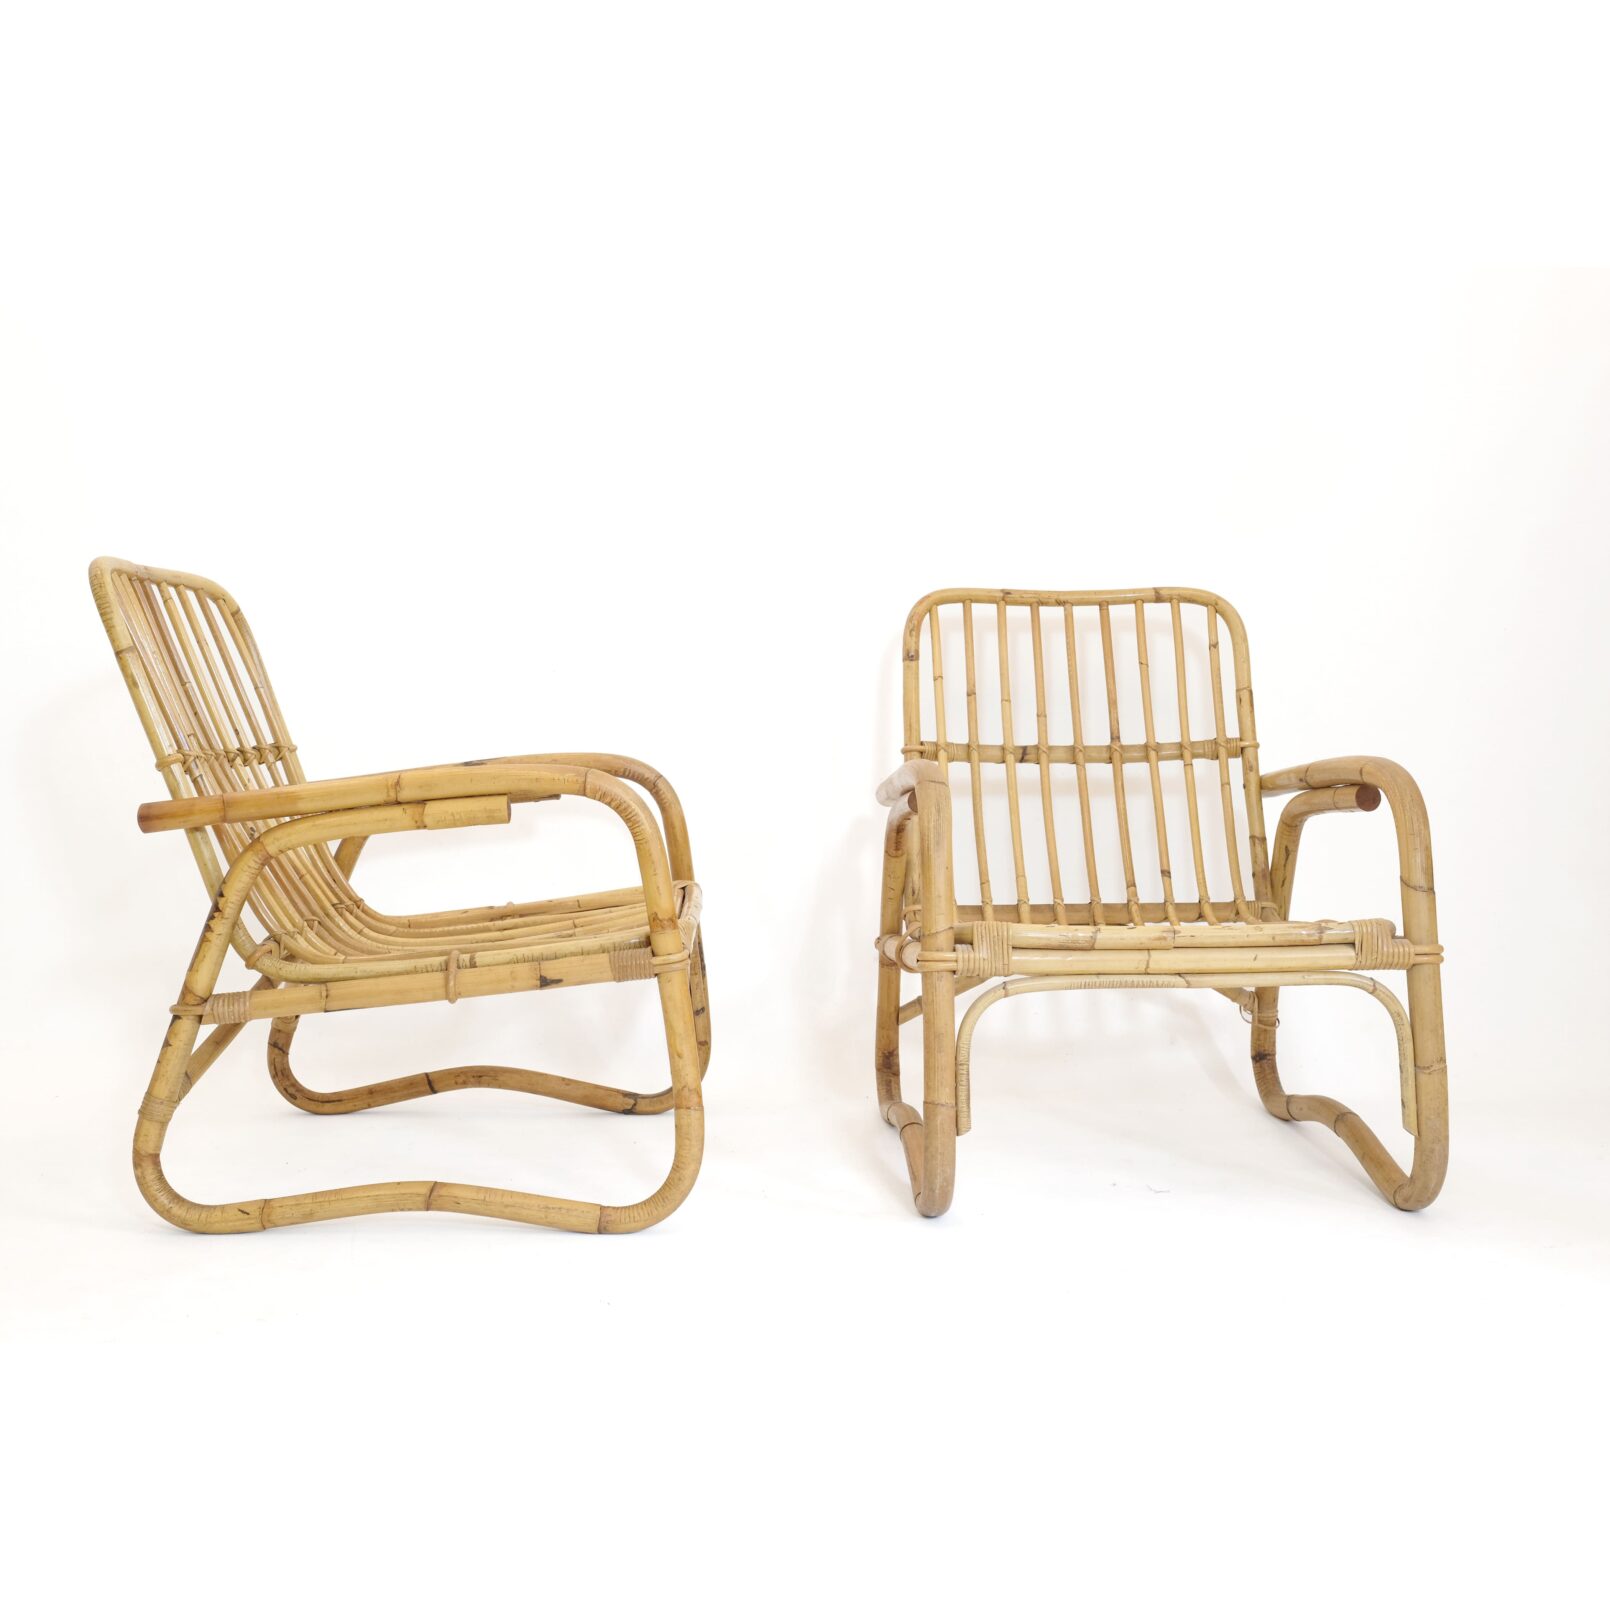 Pair of large Italian rattan lounge chairs from the 1960s.